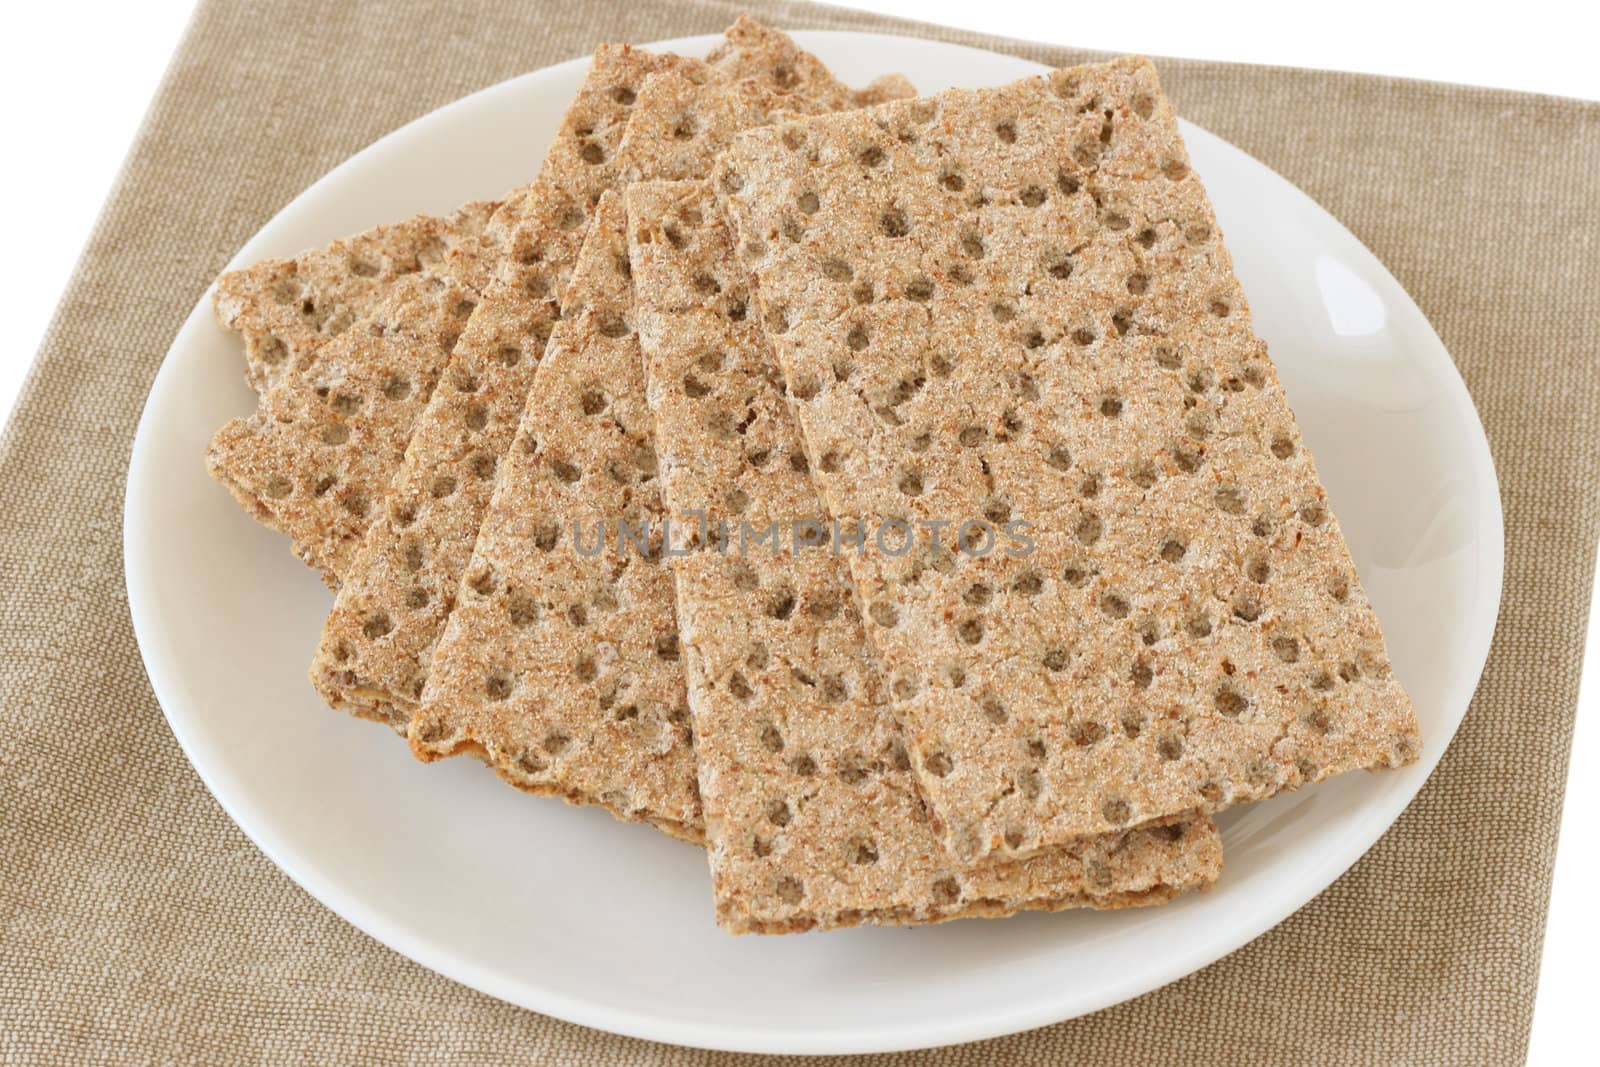 crackers on the plate